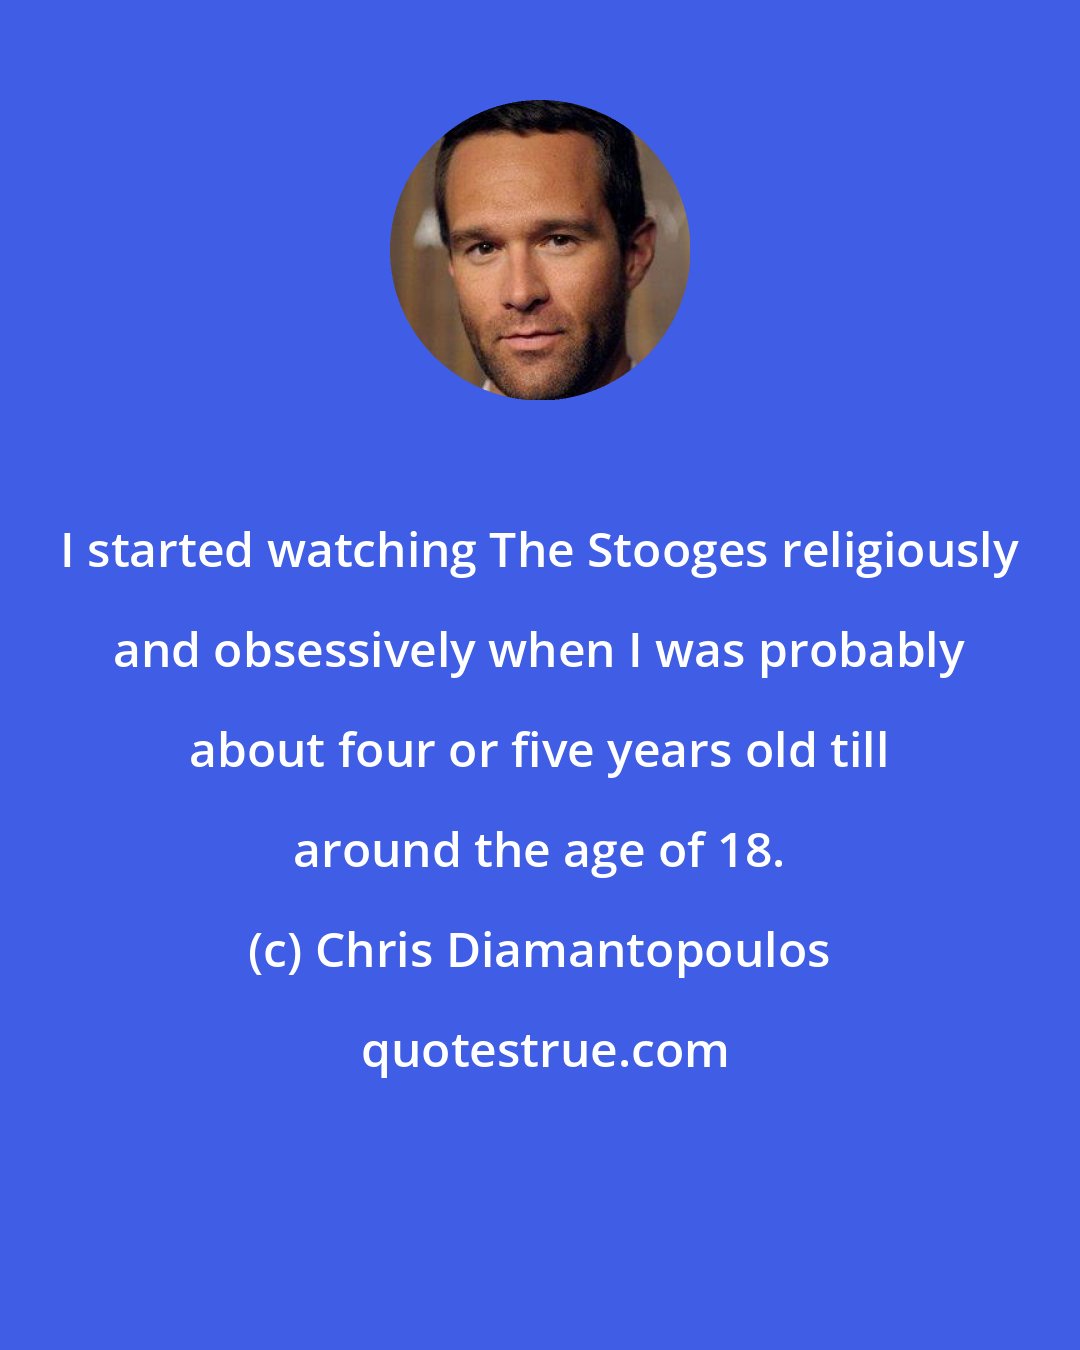 Chris Diamantopoulos: I started watching The Stooges religiously and obsessively when I was probably about four or five years old till around the age of 18.